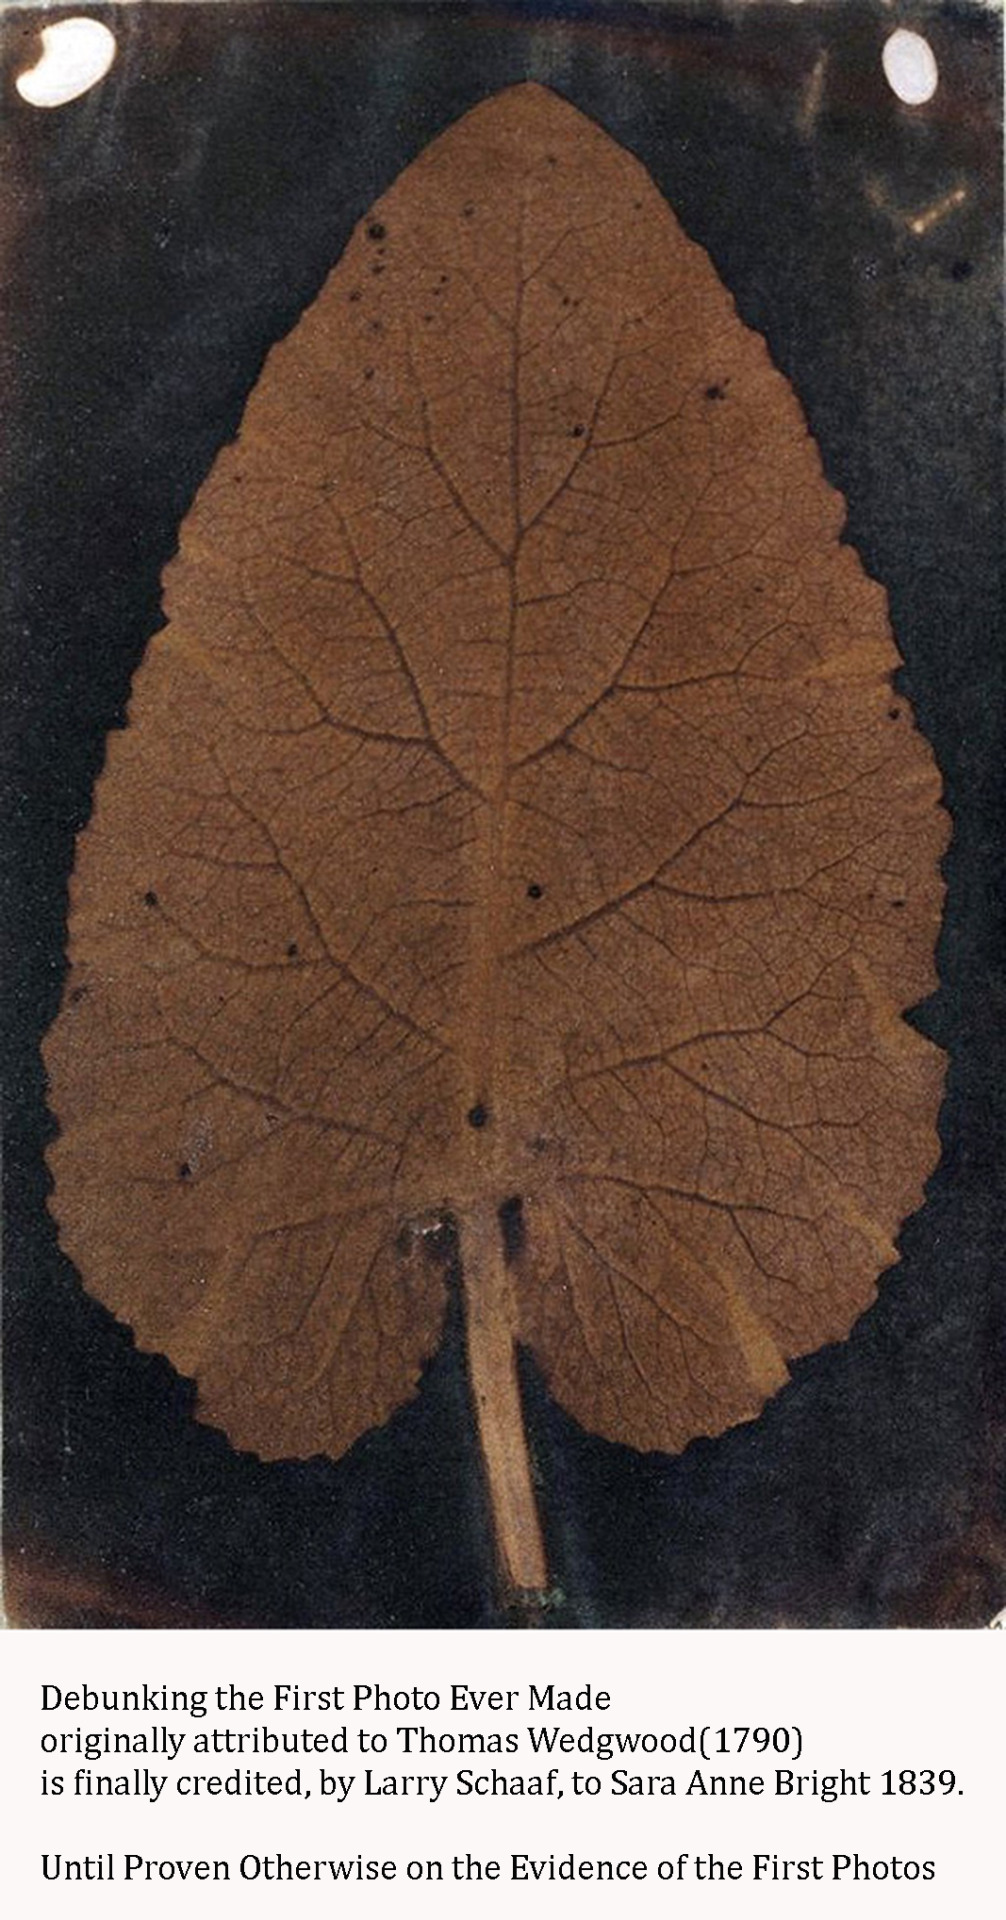 The intriguing story of the “Damned Leaf” until now considered the First surviving Photo.
Since 2008, when the photo appeared at the Sothebys’ auction, the photo was dated 1790 and credited to Thomas Wedgwood, one of the Photography pioneer...